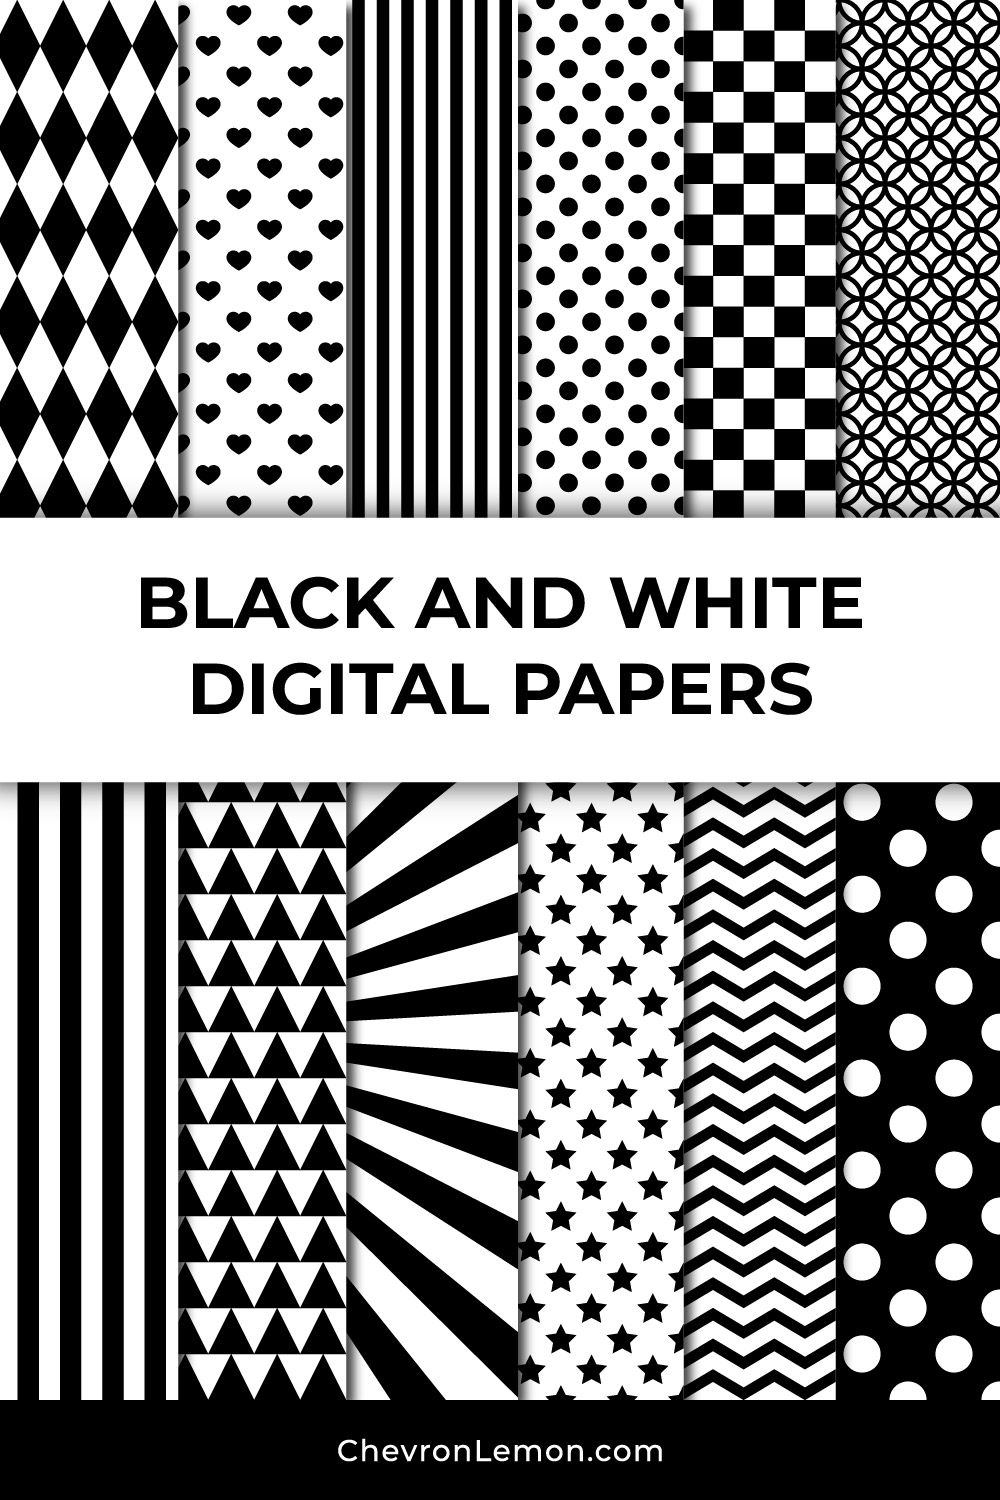 12 Printable Blank Comic Book Pages Callouts Digital Paper Pack